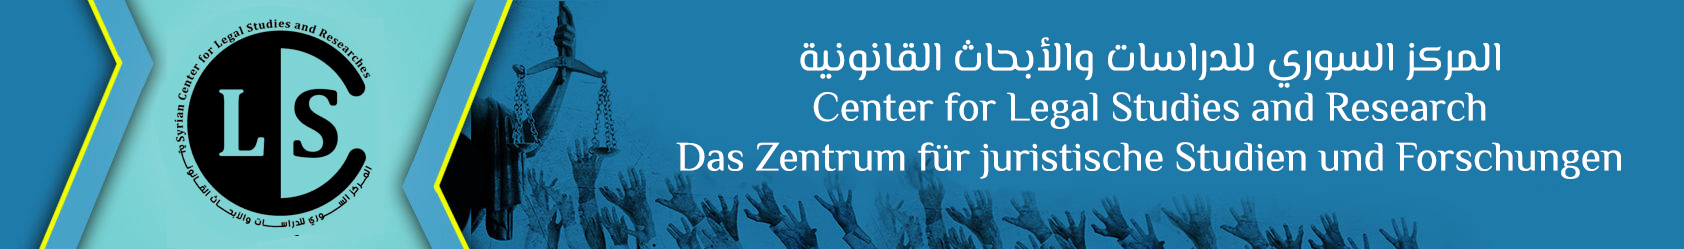 Syrian Center for Legal Studies and Research